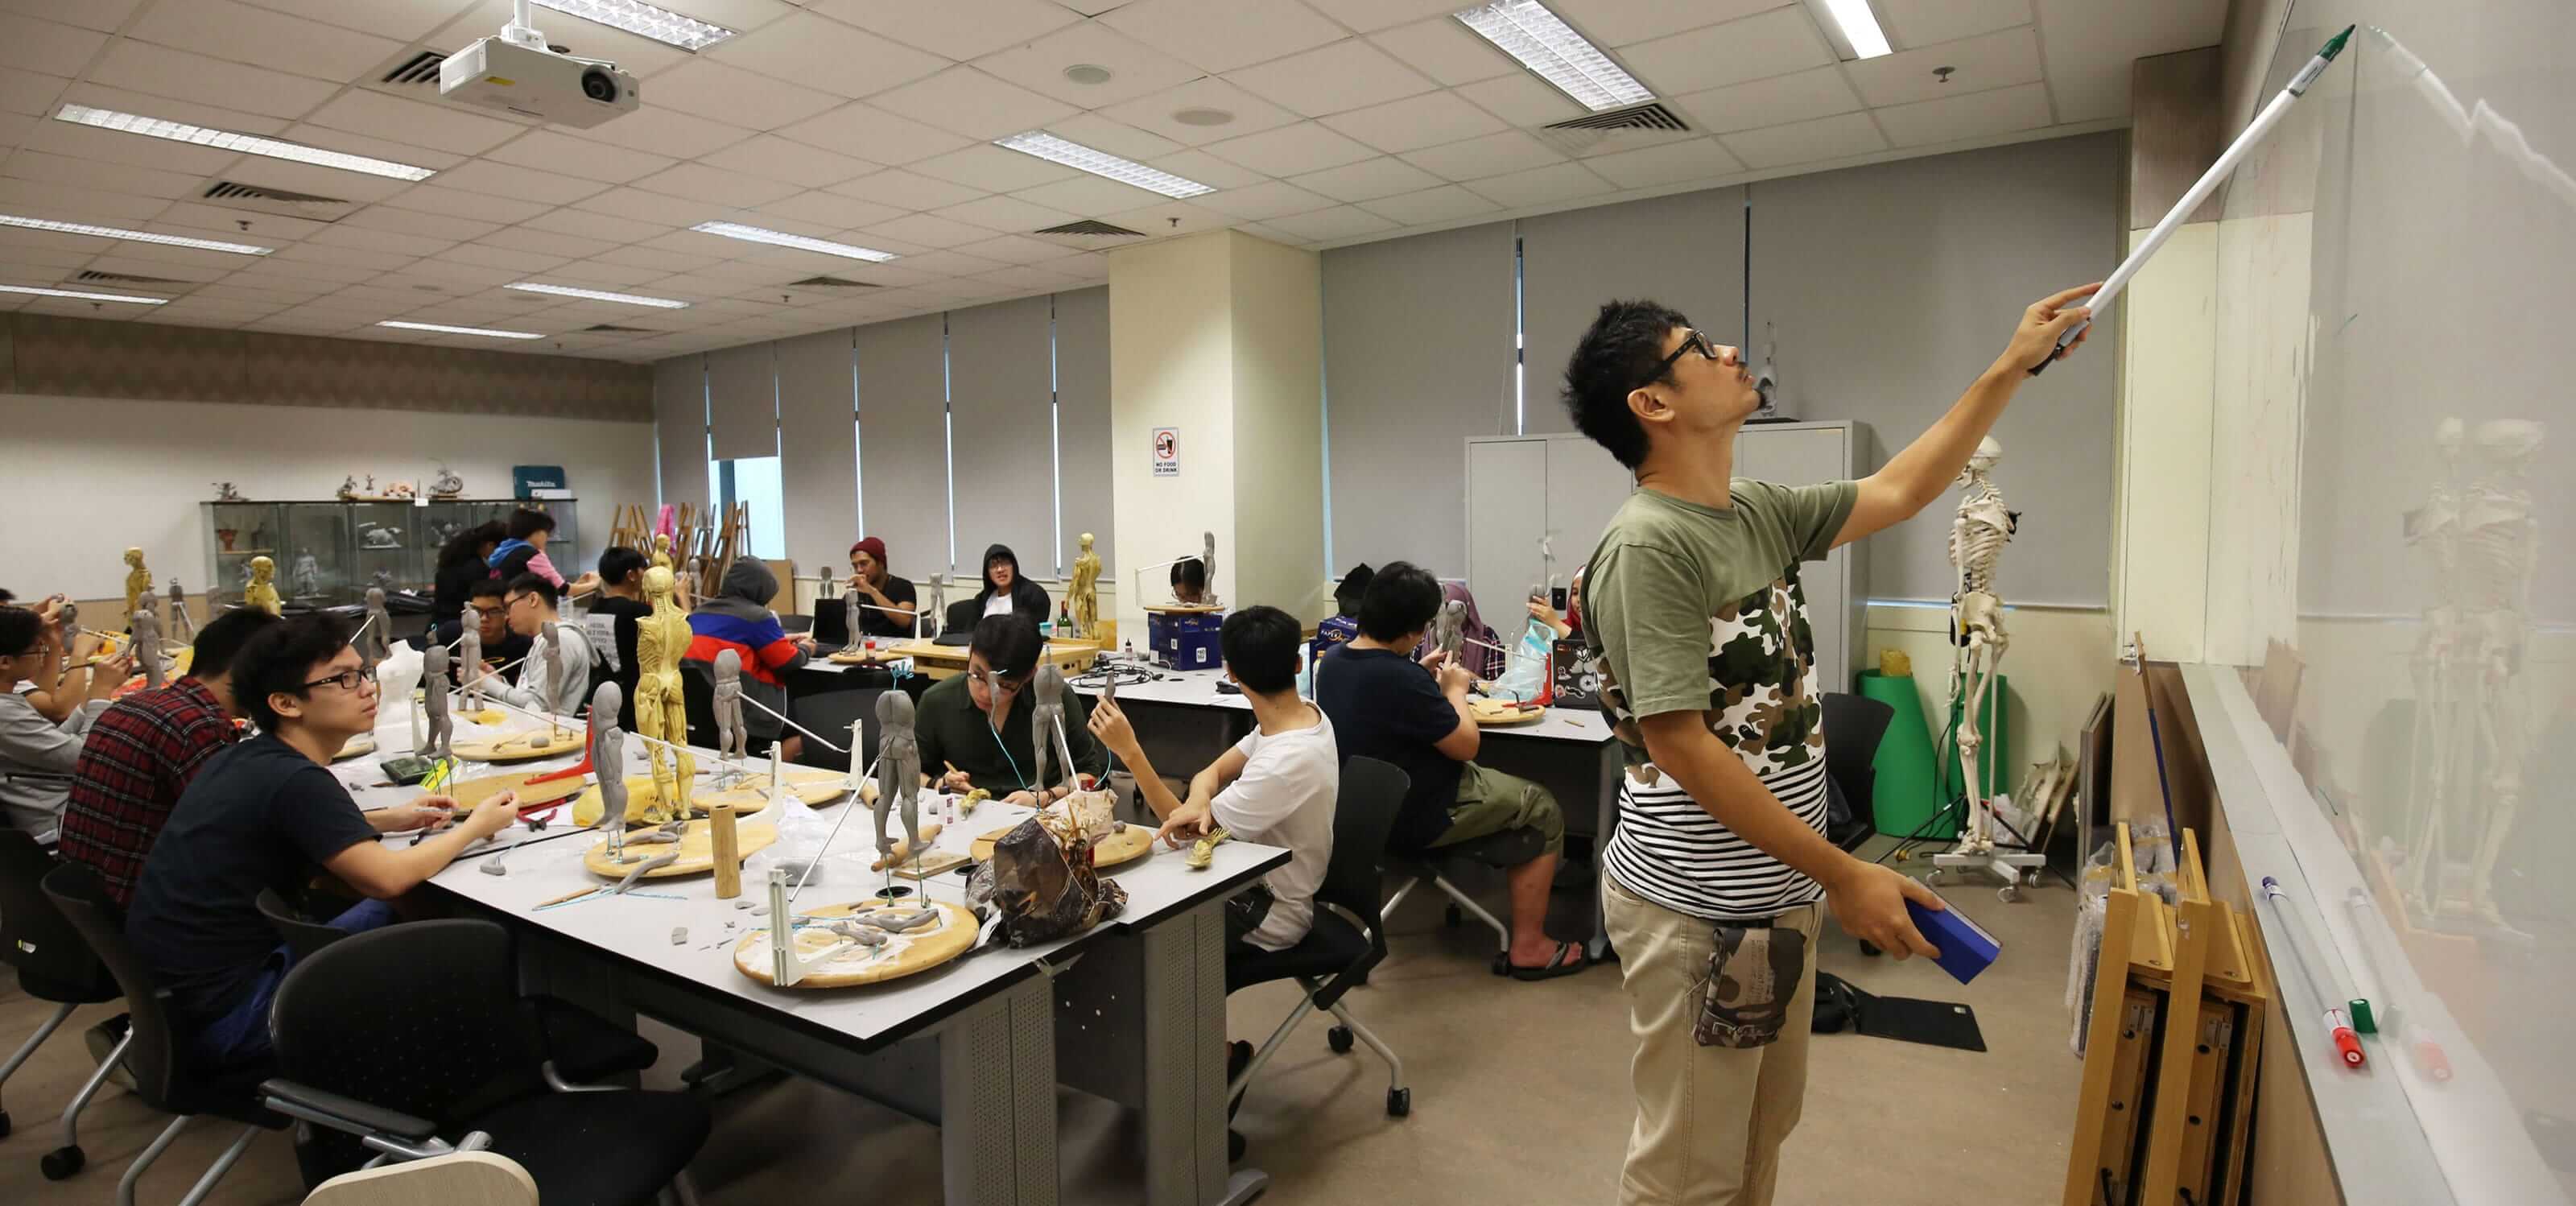 Students in a DigiPen (Singapore) sculpting class watch as an instructor writes on a whiteboard